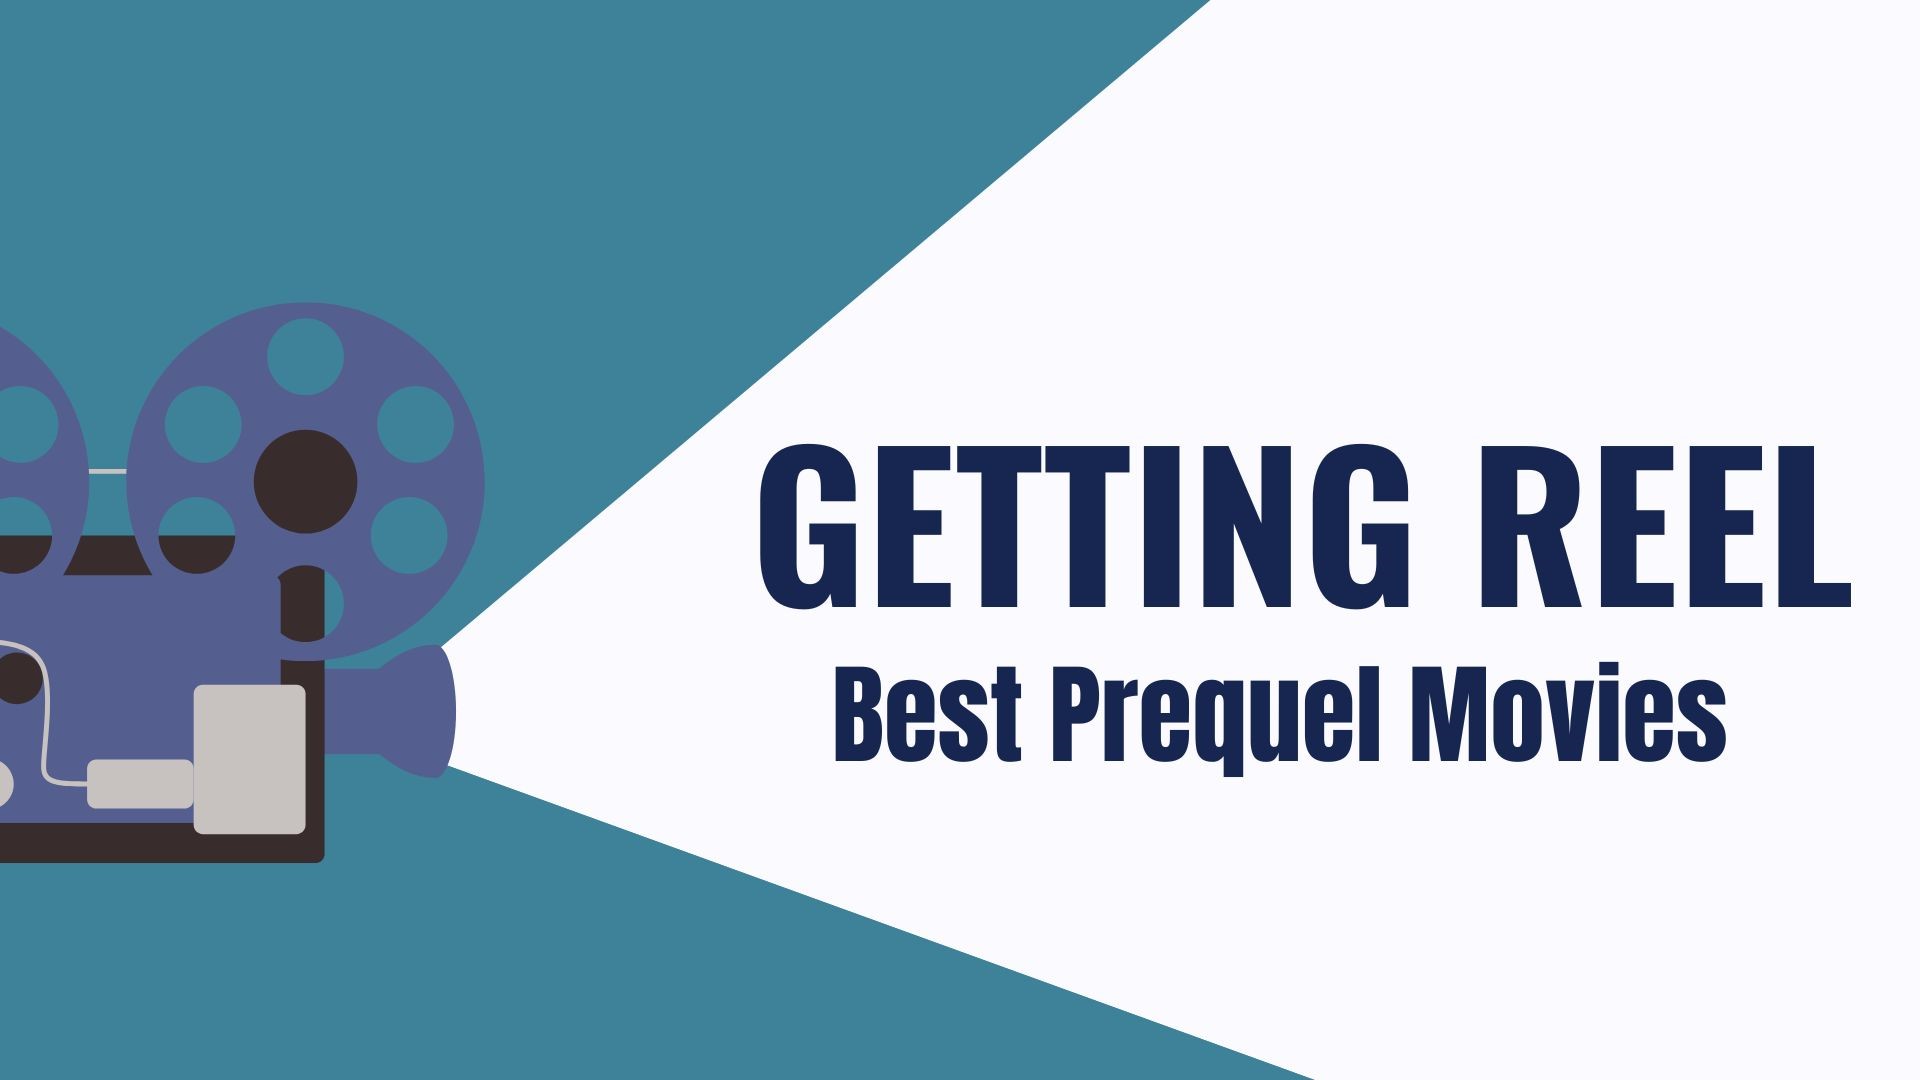 KTHV movie reviewers discuss their picks for best prequels of all times. From the one that sets the standard, to which films from the Fast & Furious franchise count.